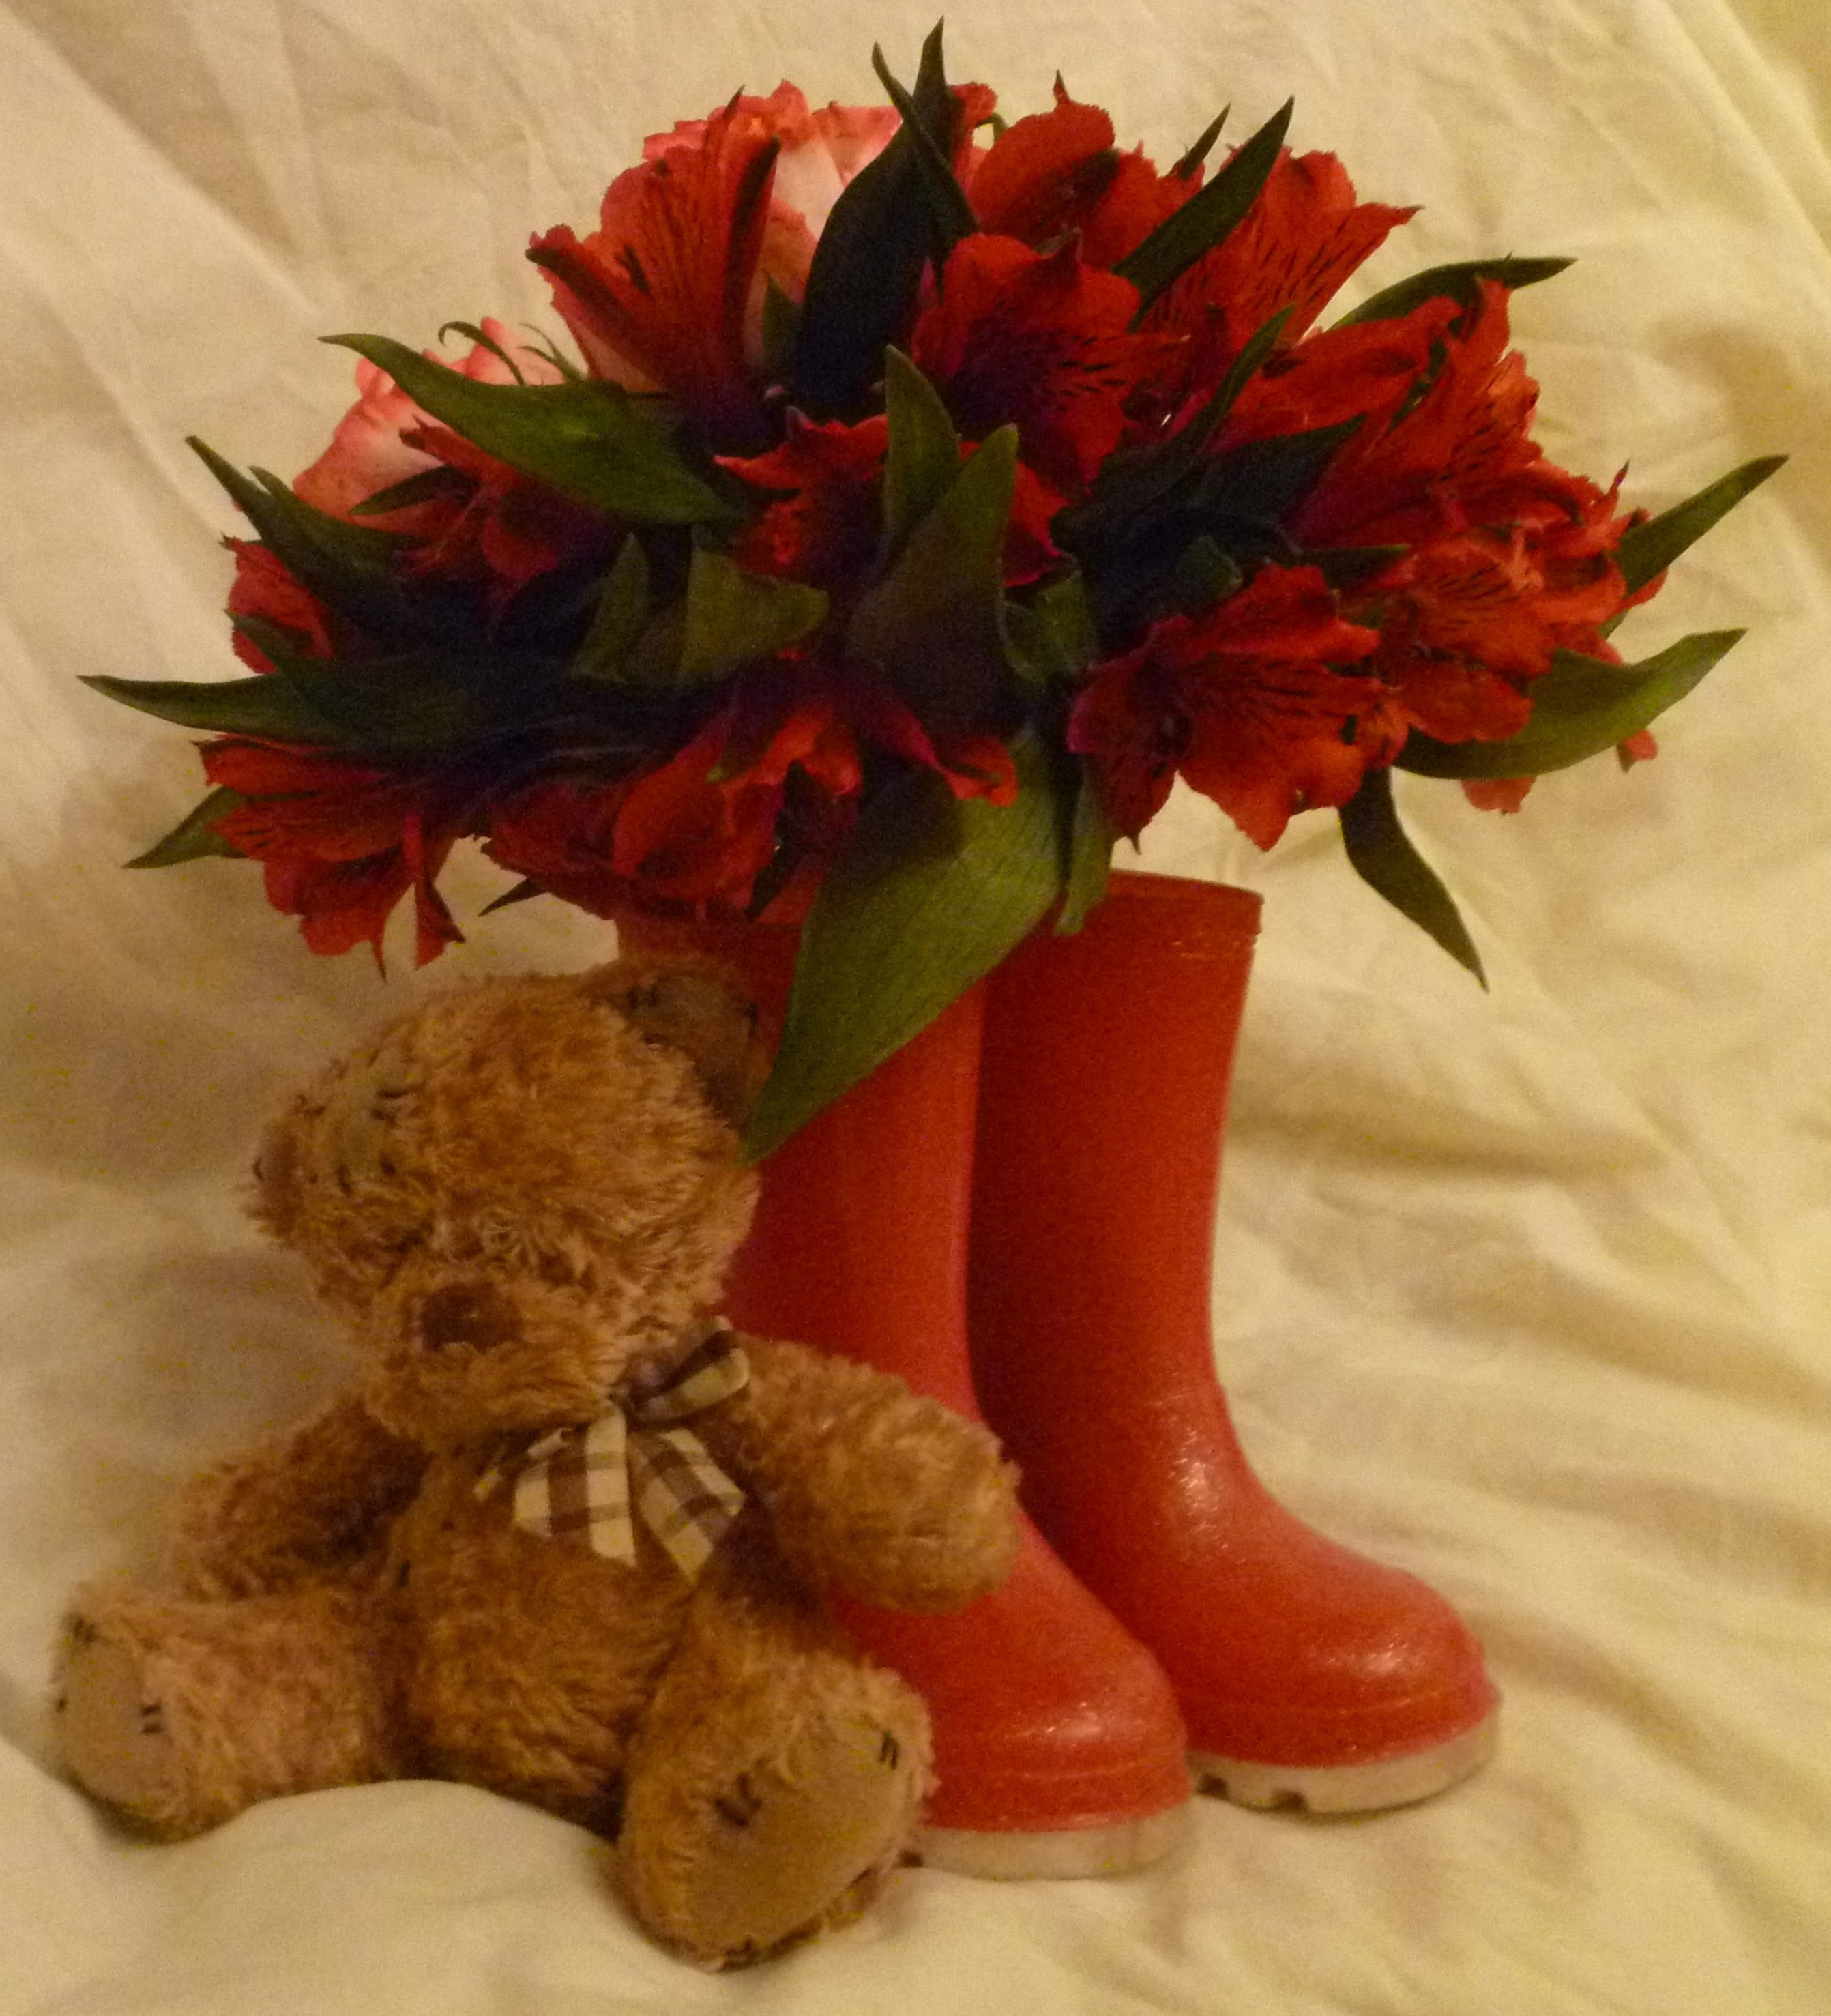 Oadby florist, Wigston florist, Leicester Contract & business flowers in boots with a teddy bear